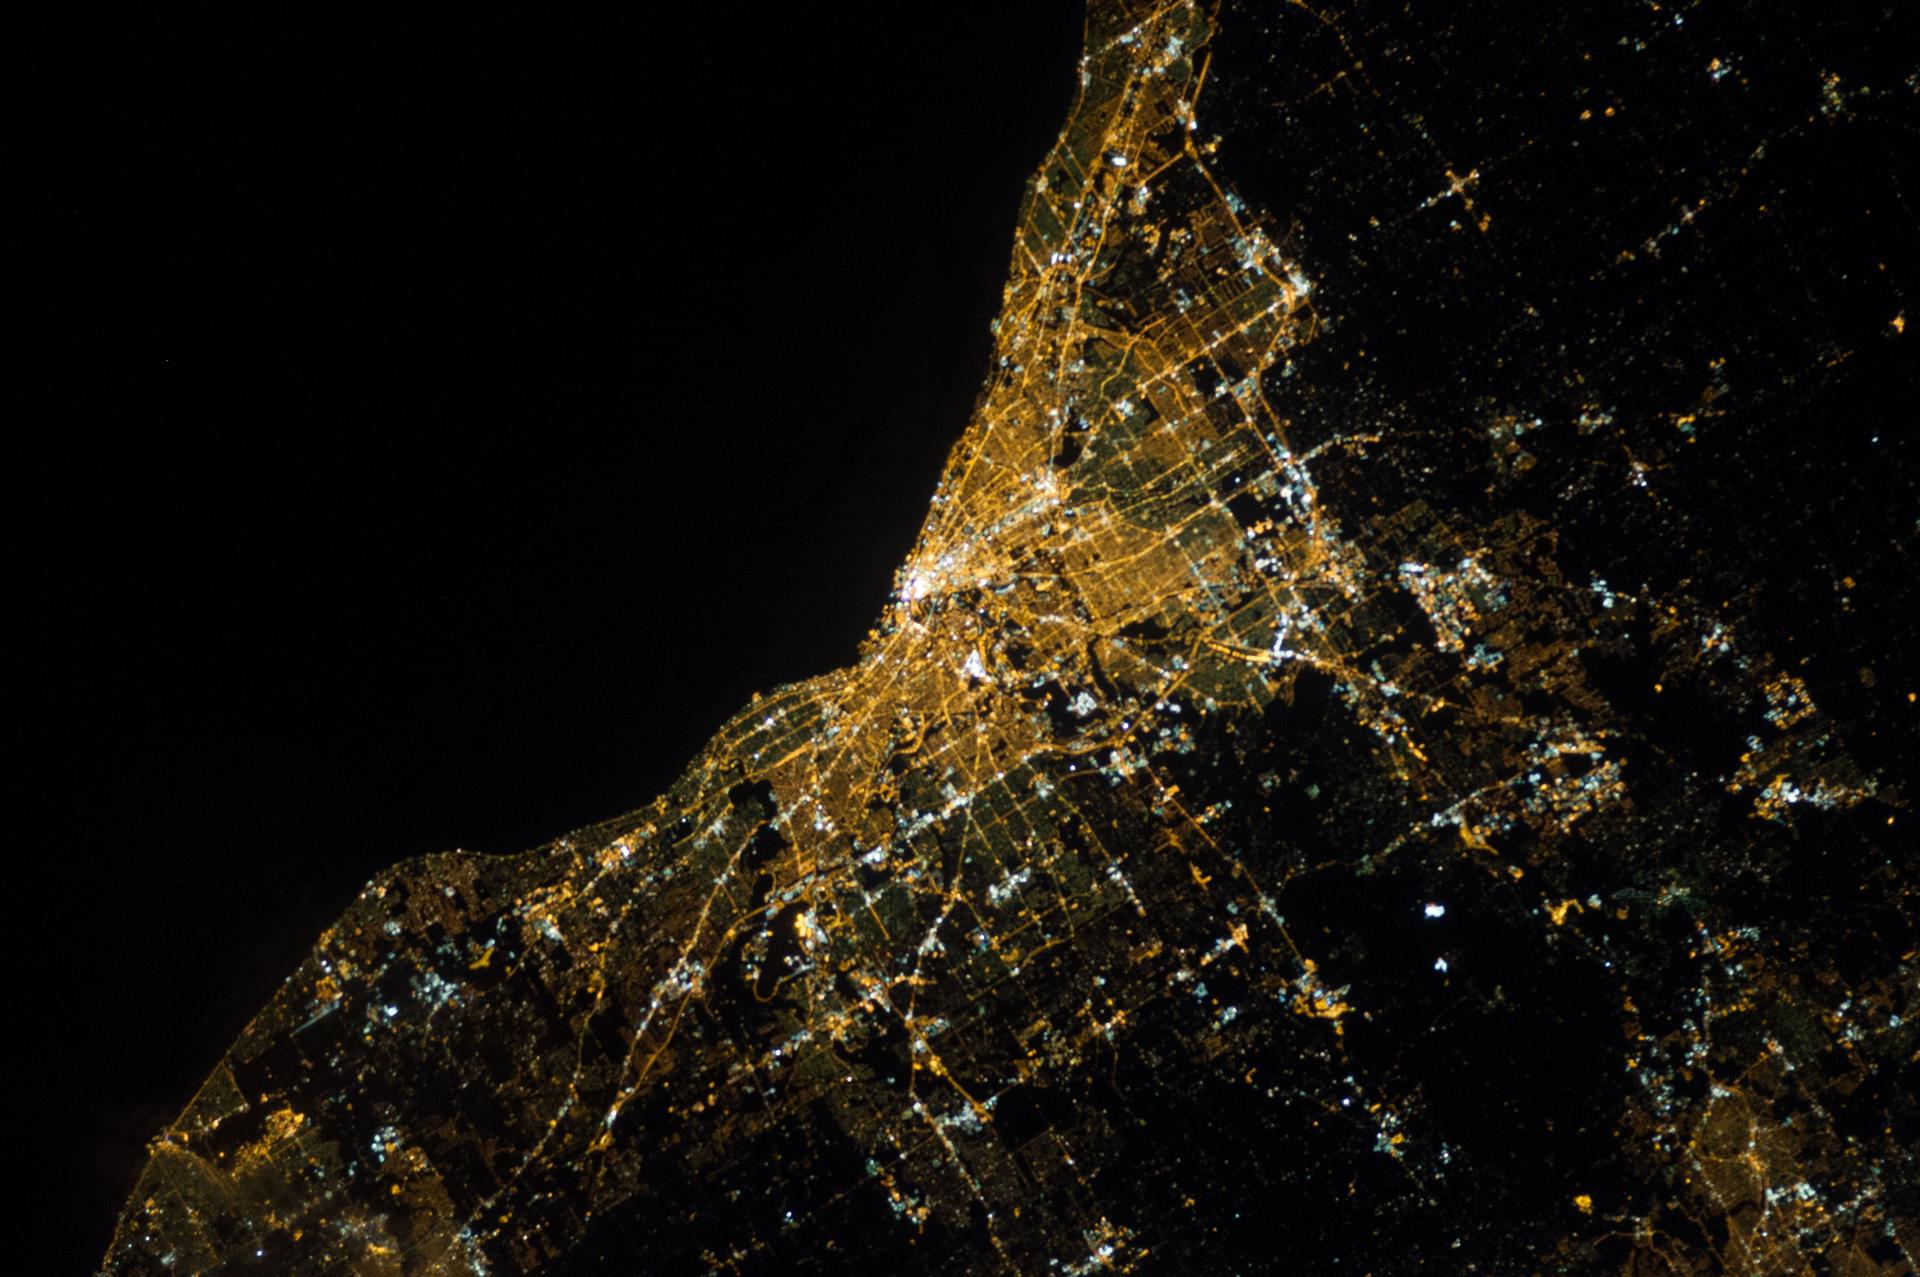 Dark background and lights in the city of Cleveland as seen from space.